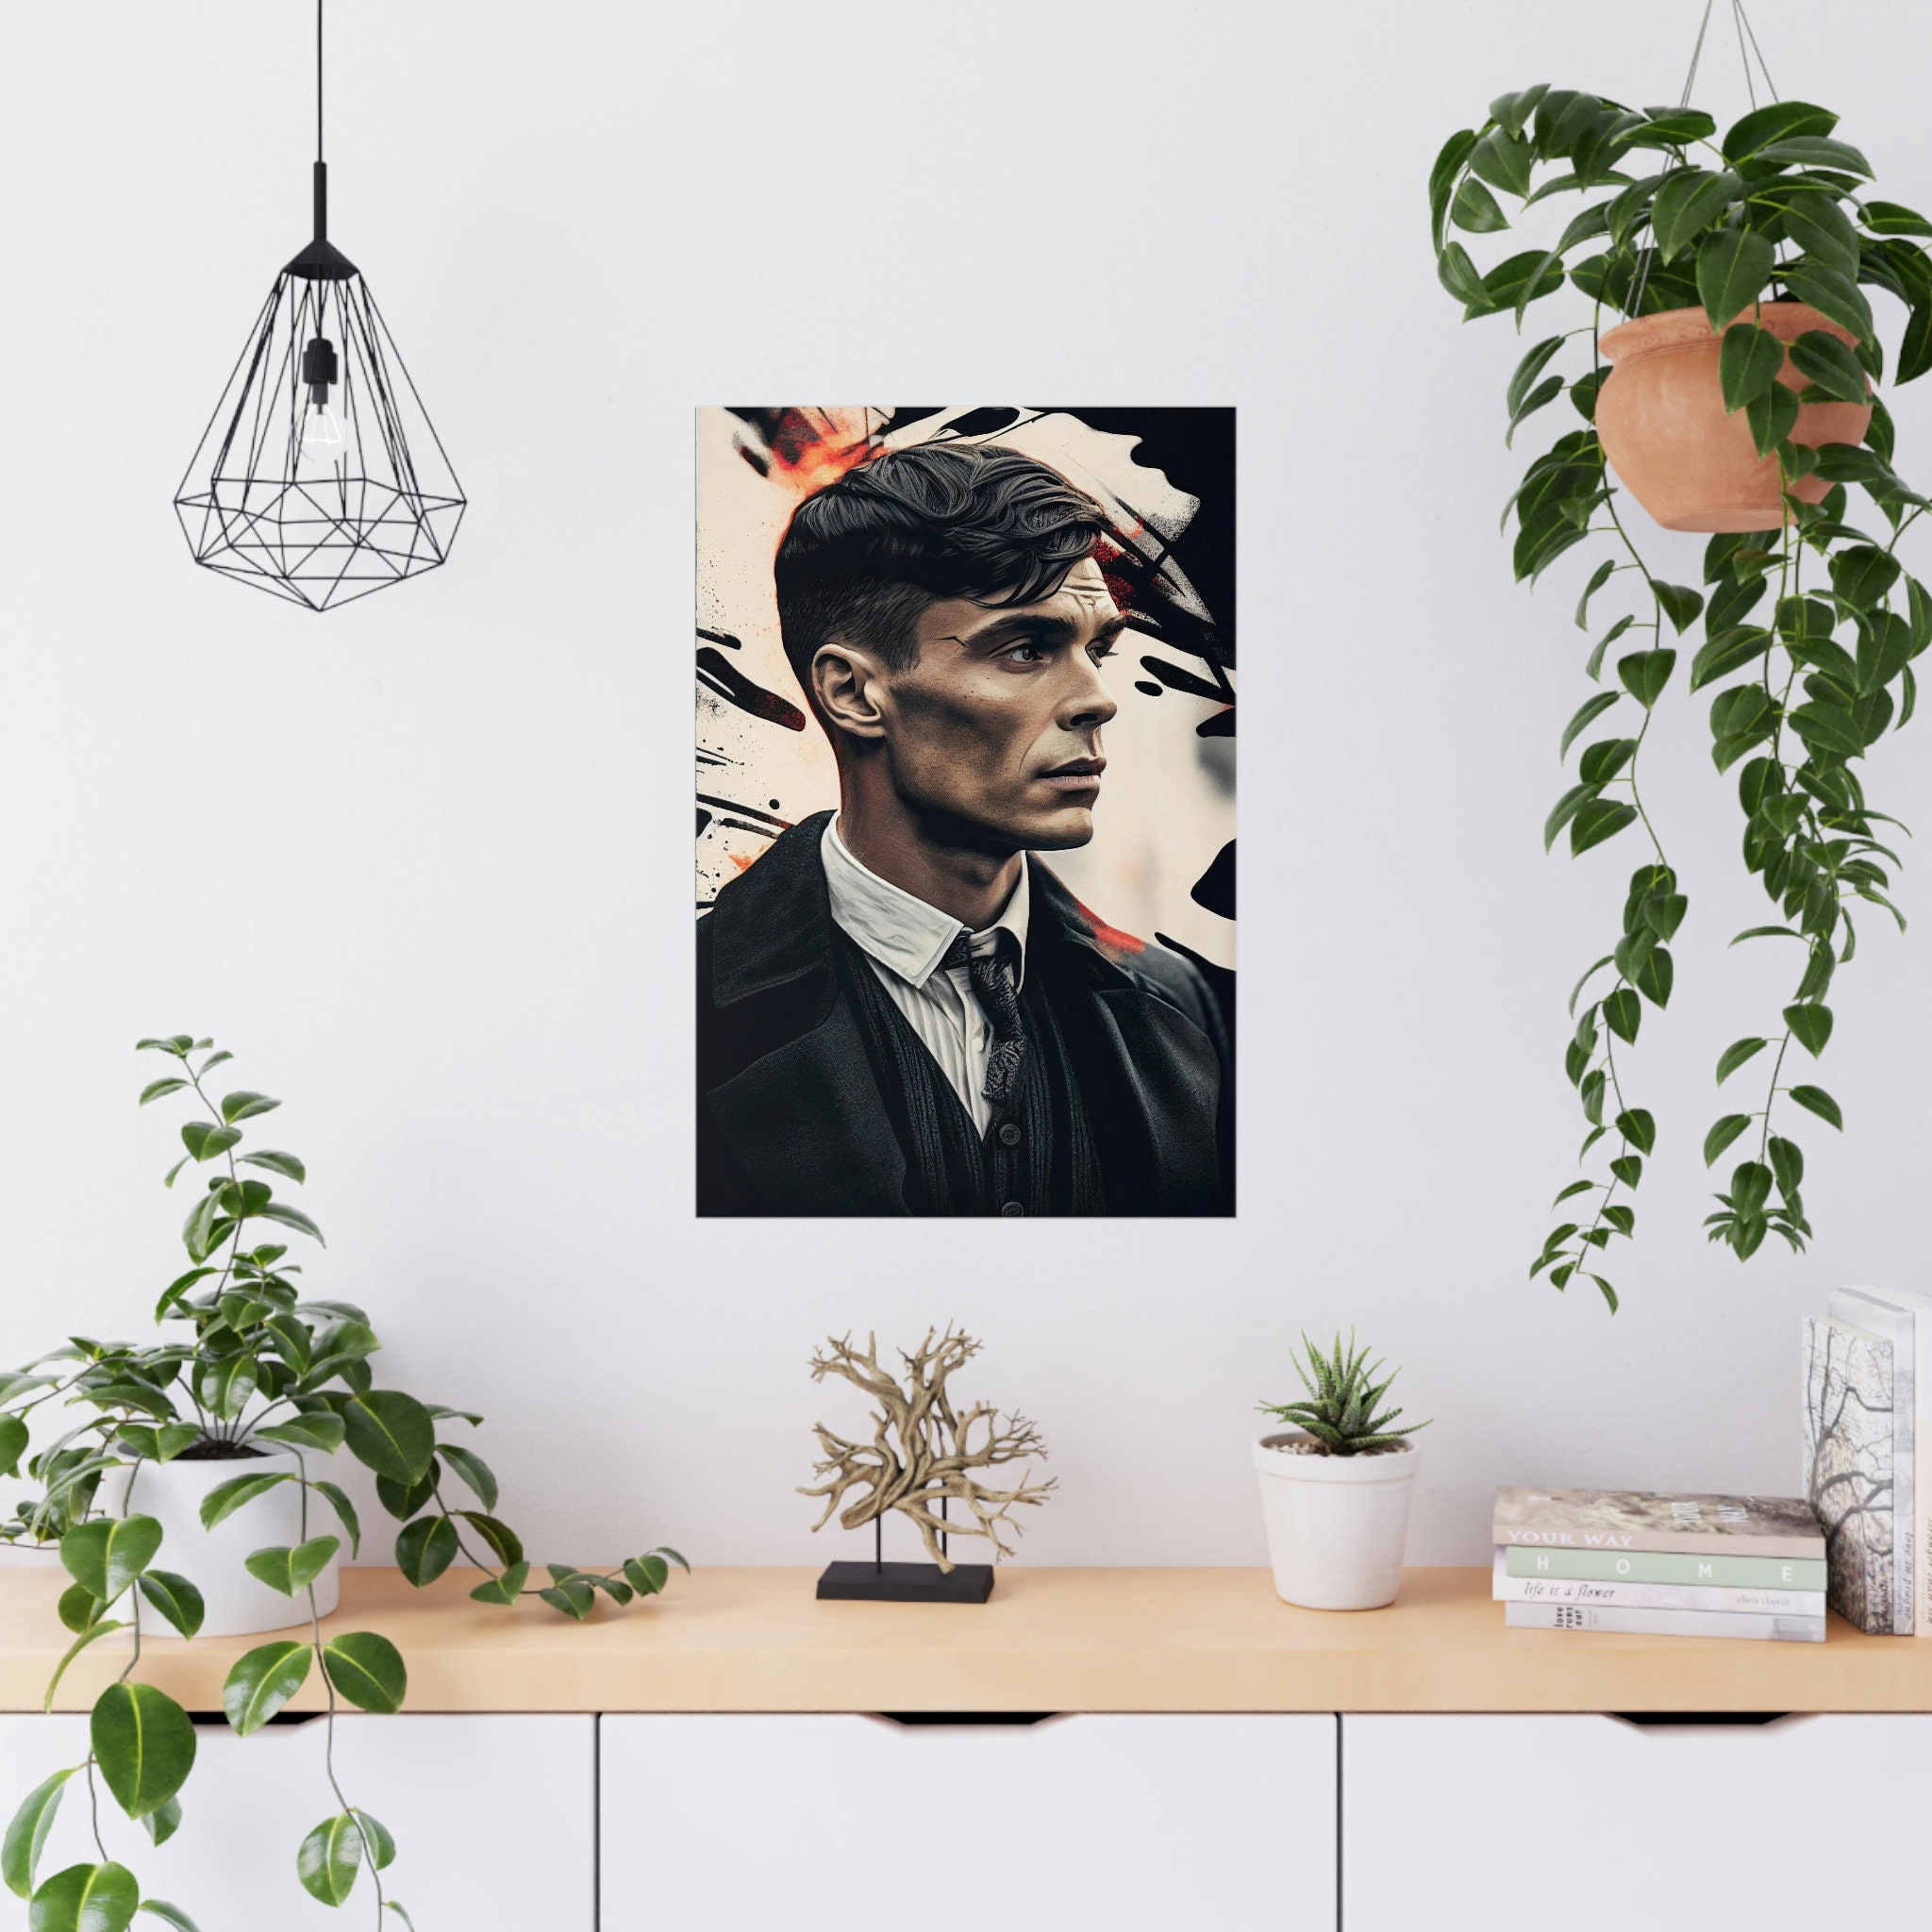 Peaky Blinders Movie Chracter Cilian Murphy Wall Art Home Decor - POSTER  20x30